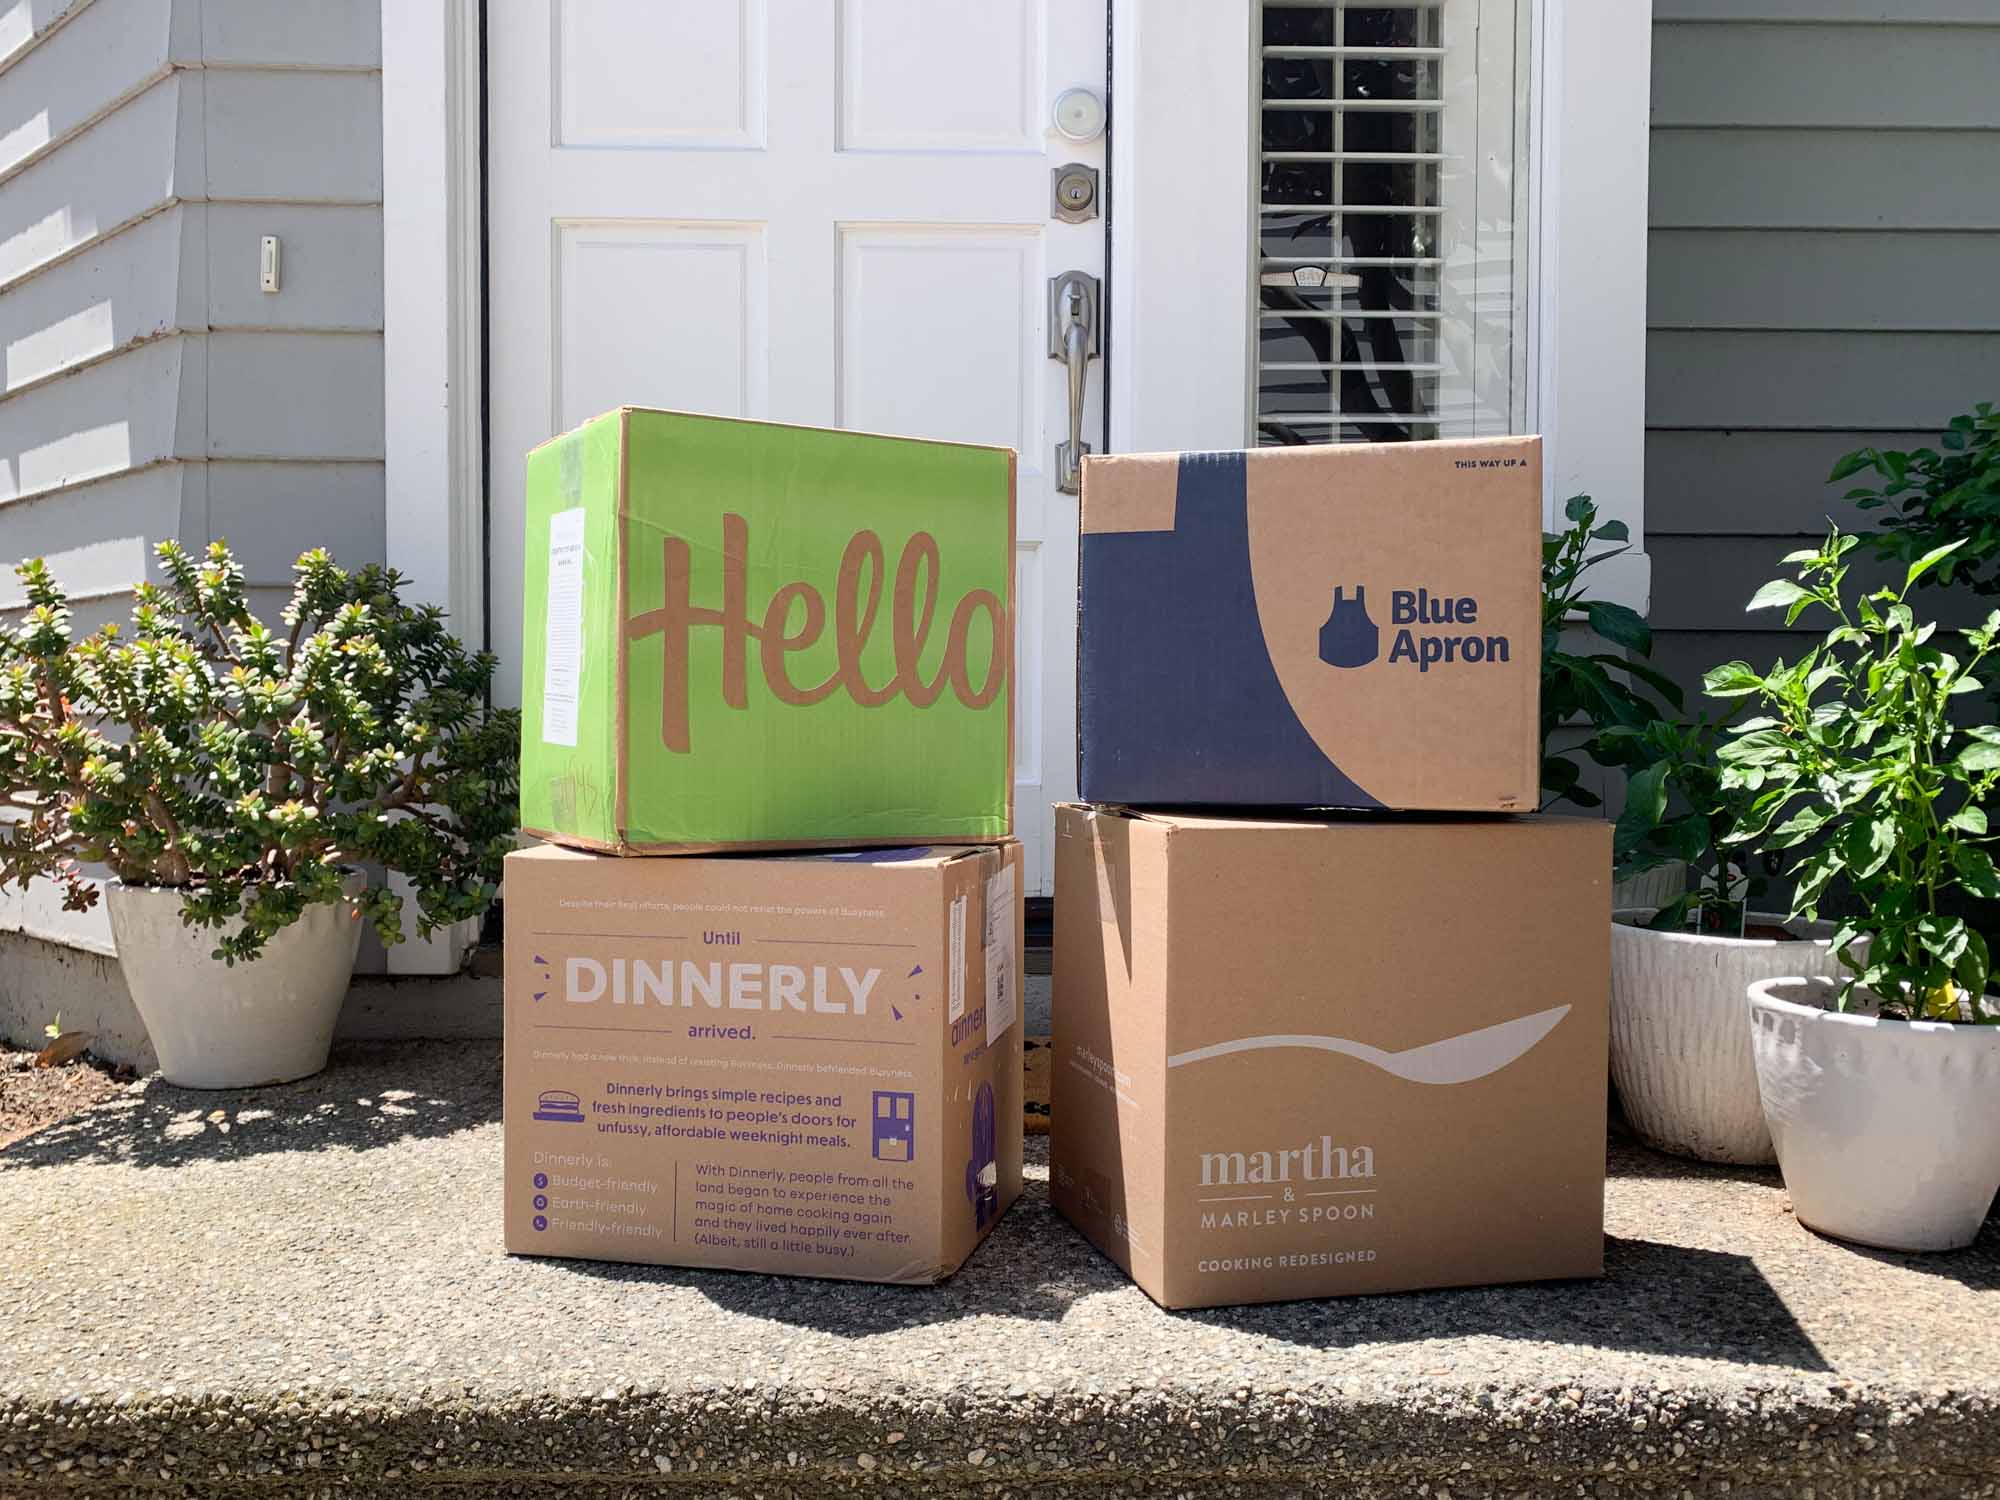 8 Best Meal Kit Delivery Services (2023): Blue Apron, Dinnerly, and More